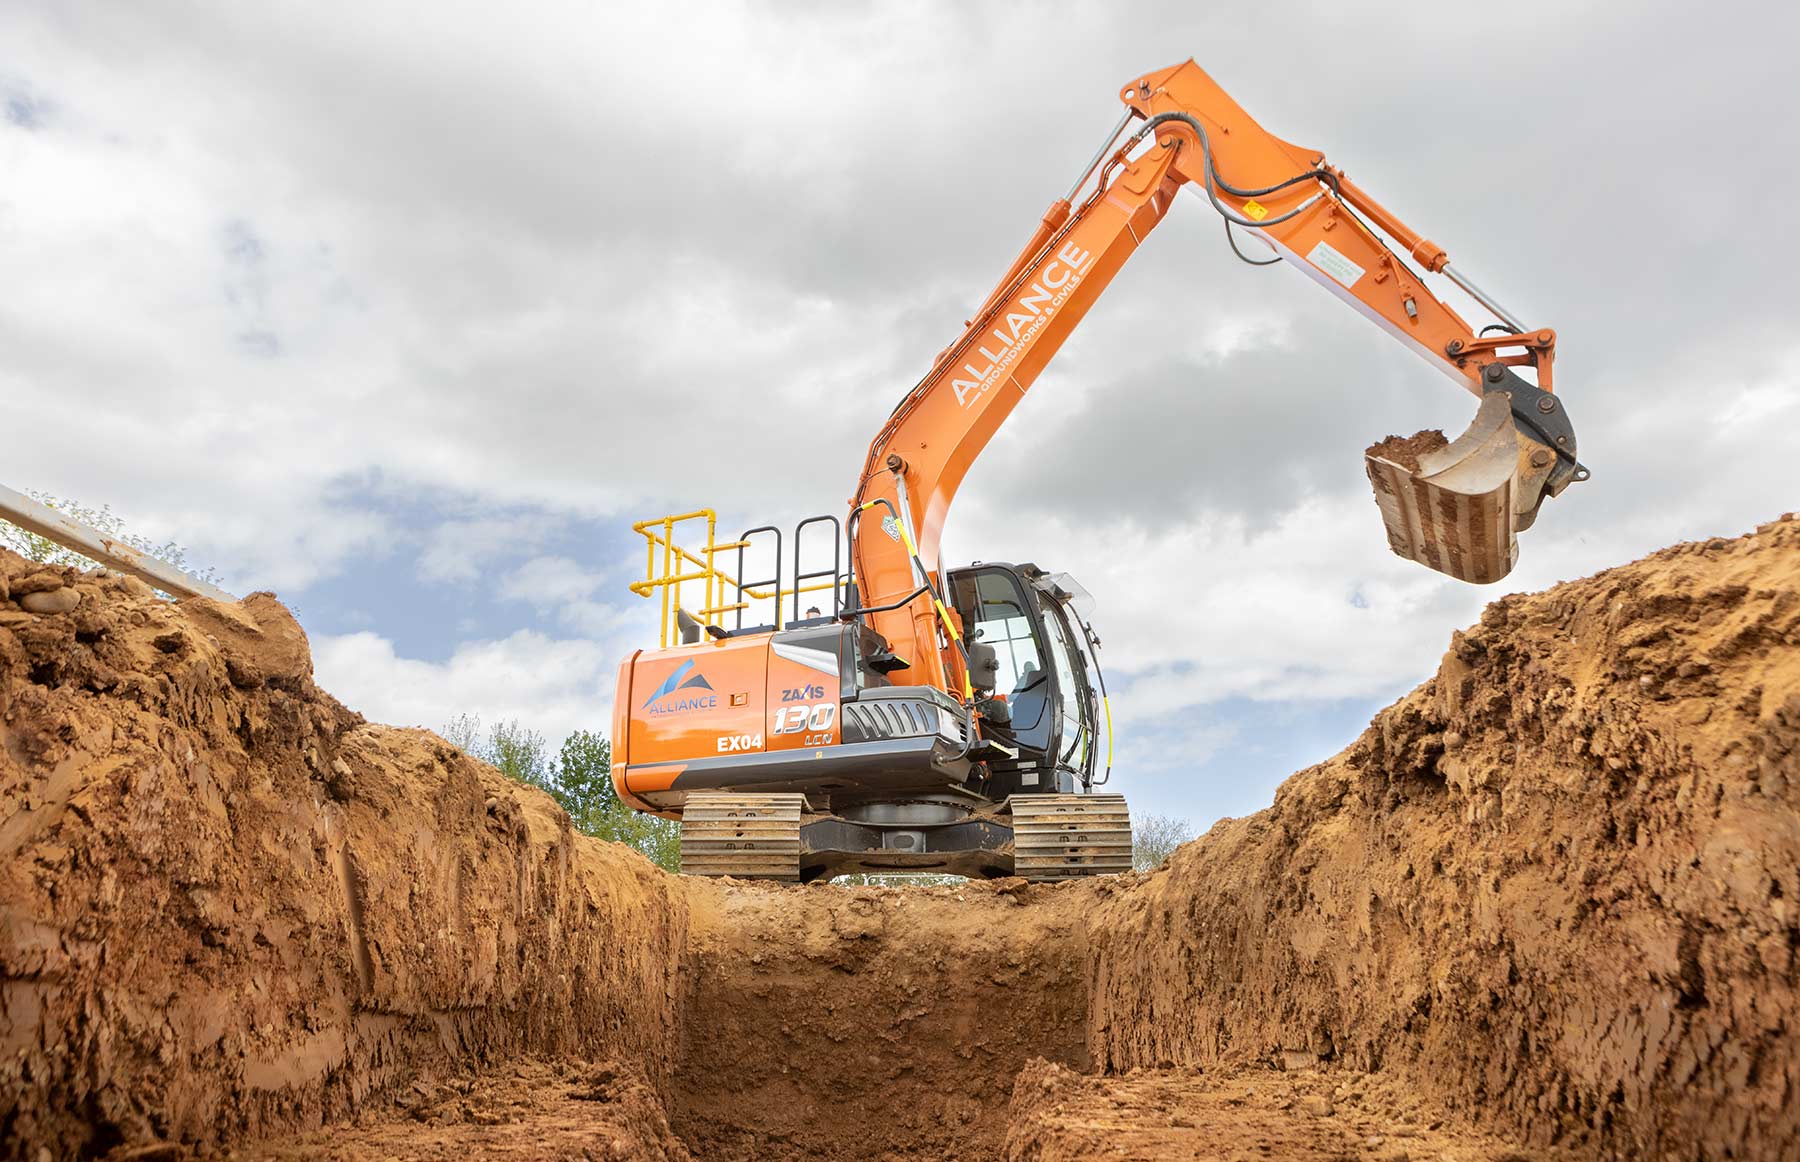 An orange Zaxis 130 excavating a trench against a cloudy sky